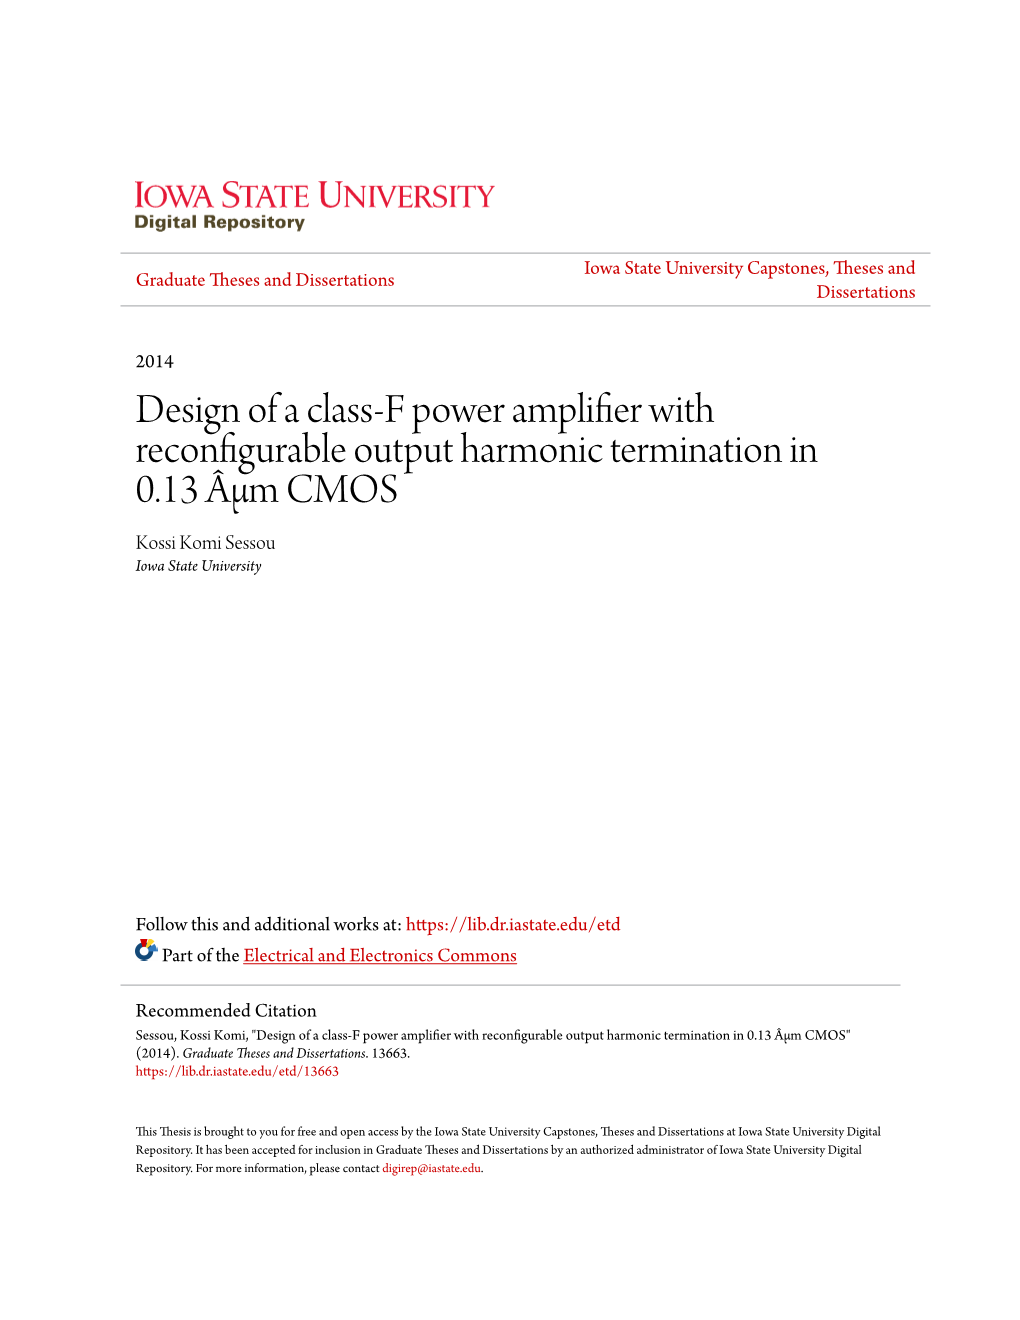 Design of a Class-F Power Amplifier with Reconfigurable Output Harmonic Termination in 0.13 Âµm CMOS Kossi Komi Sessou Iowa State University